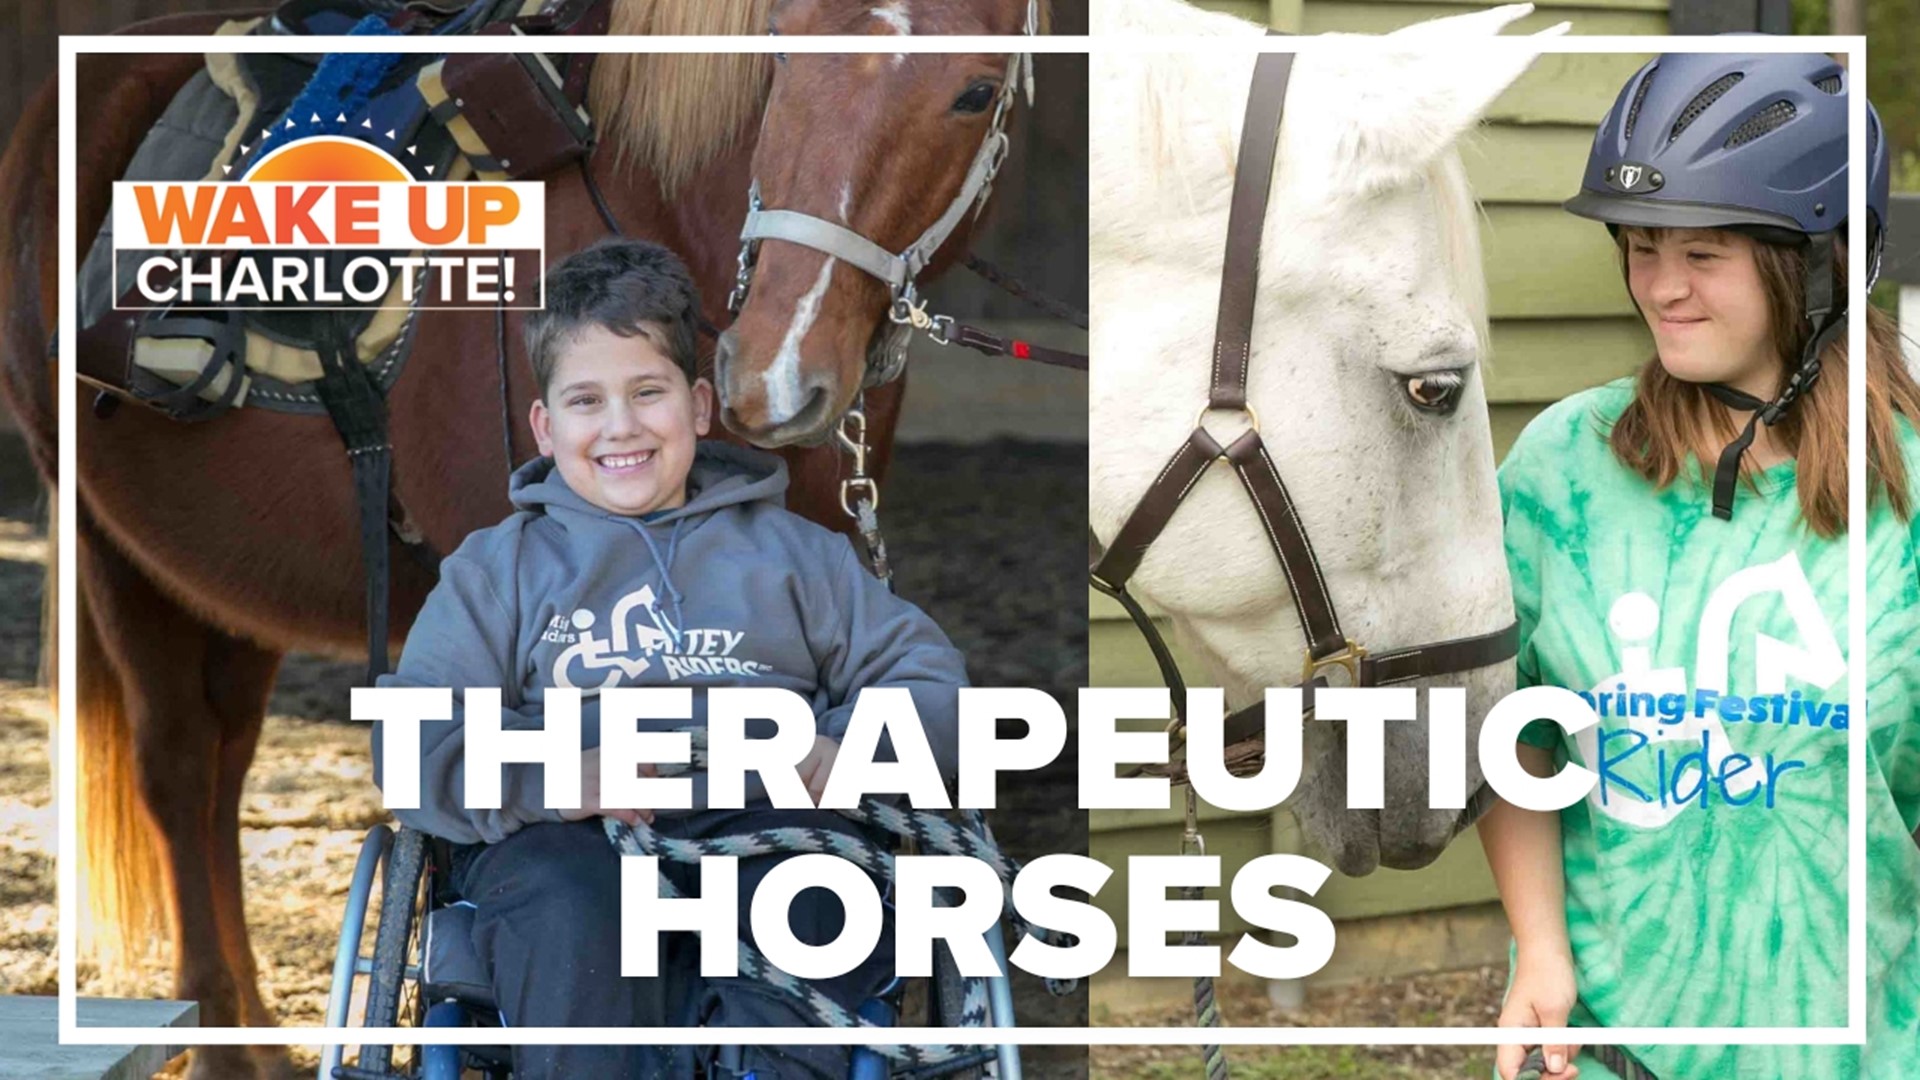 They provide free therapeutic horseback riding for kids with special needs